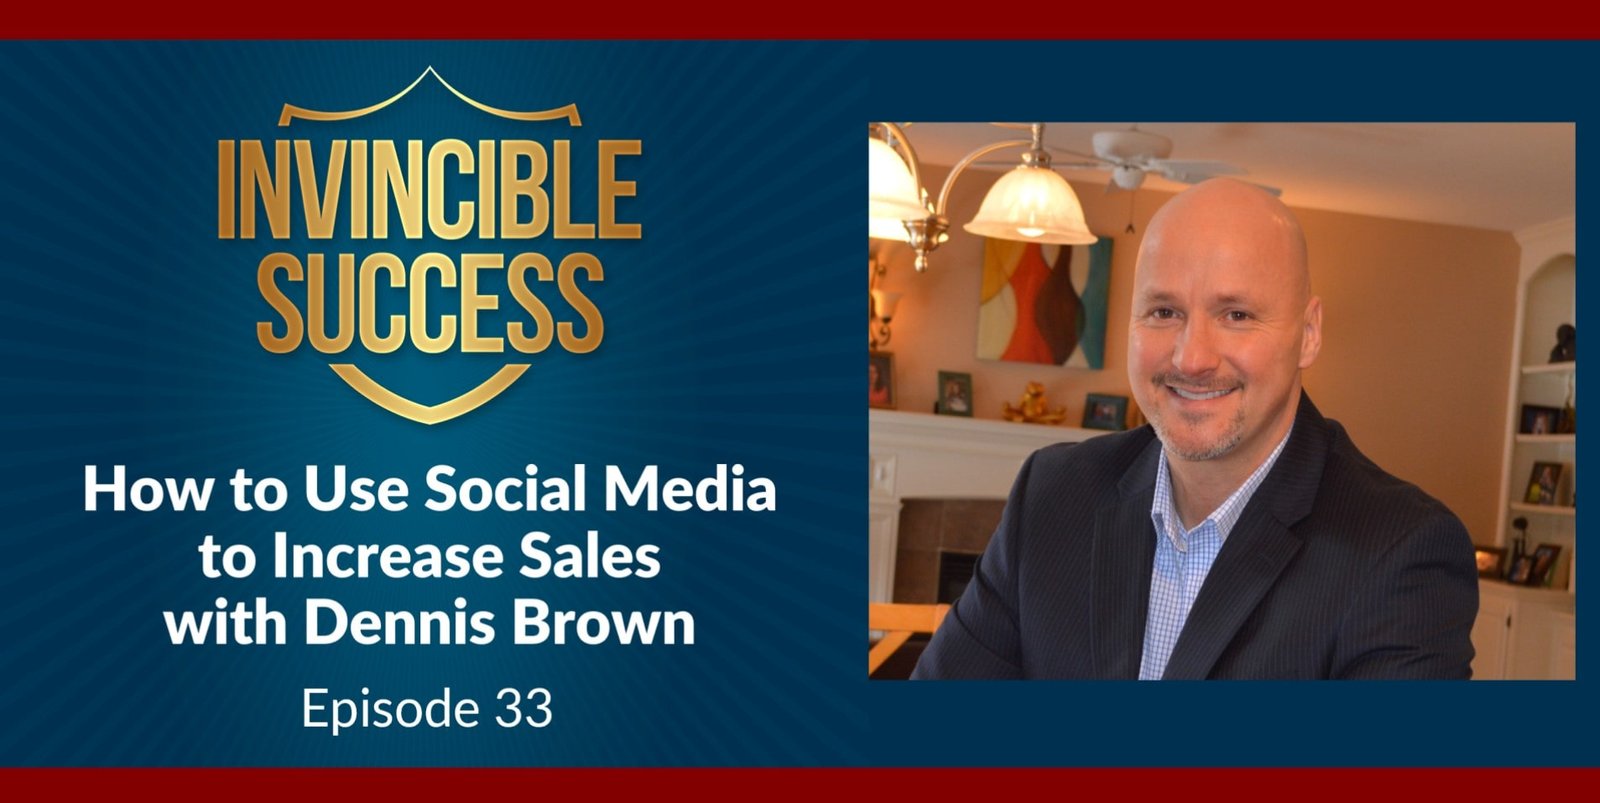 Use social media to increase sales with Growth Expert Dennis Brown